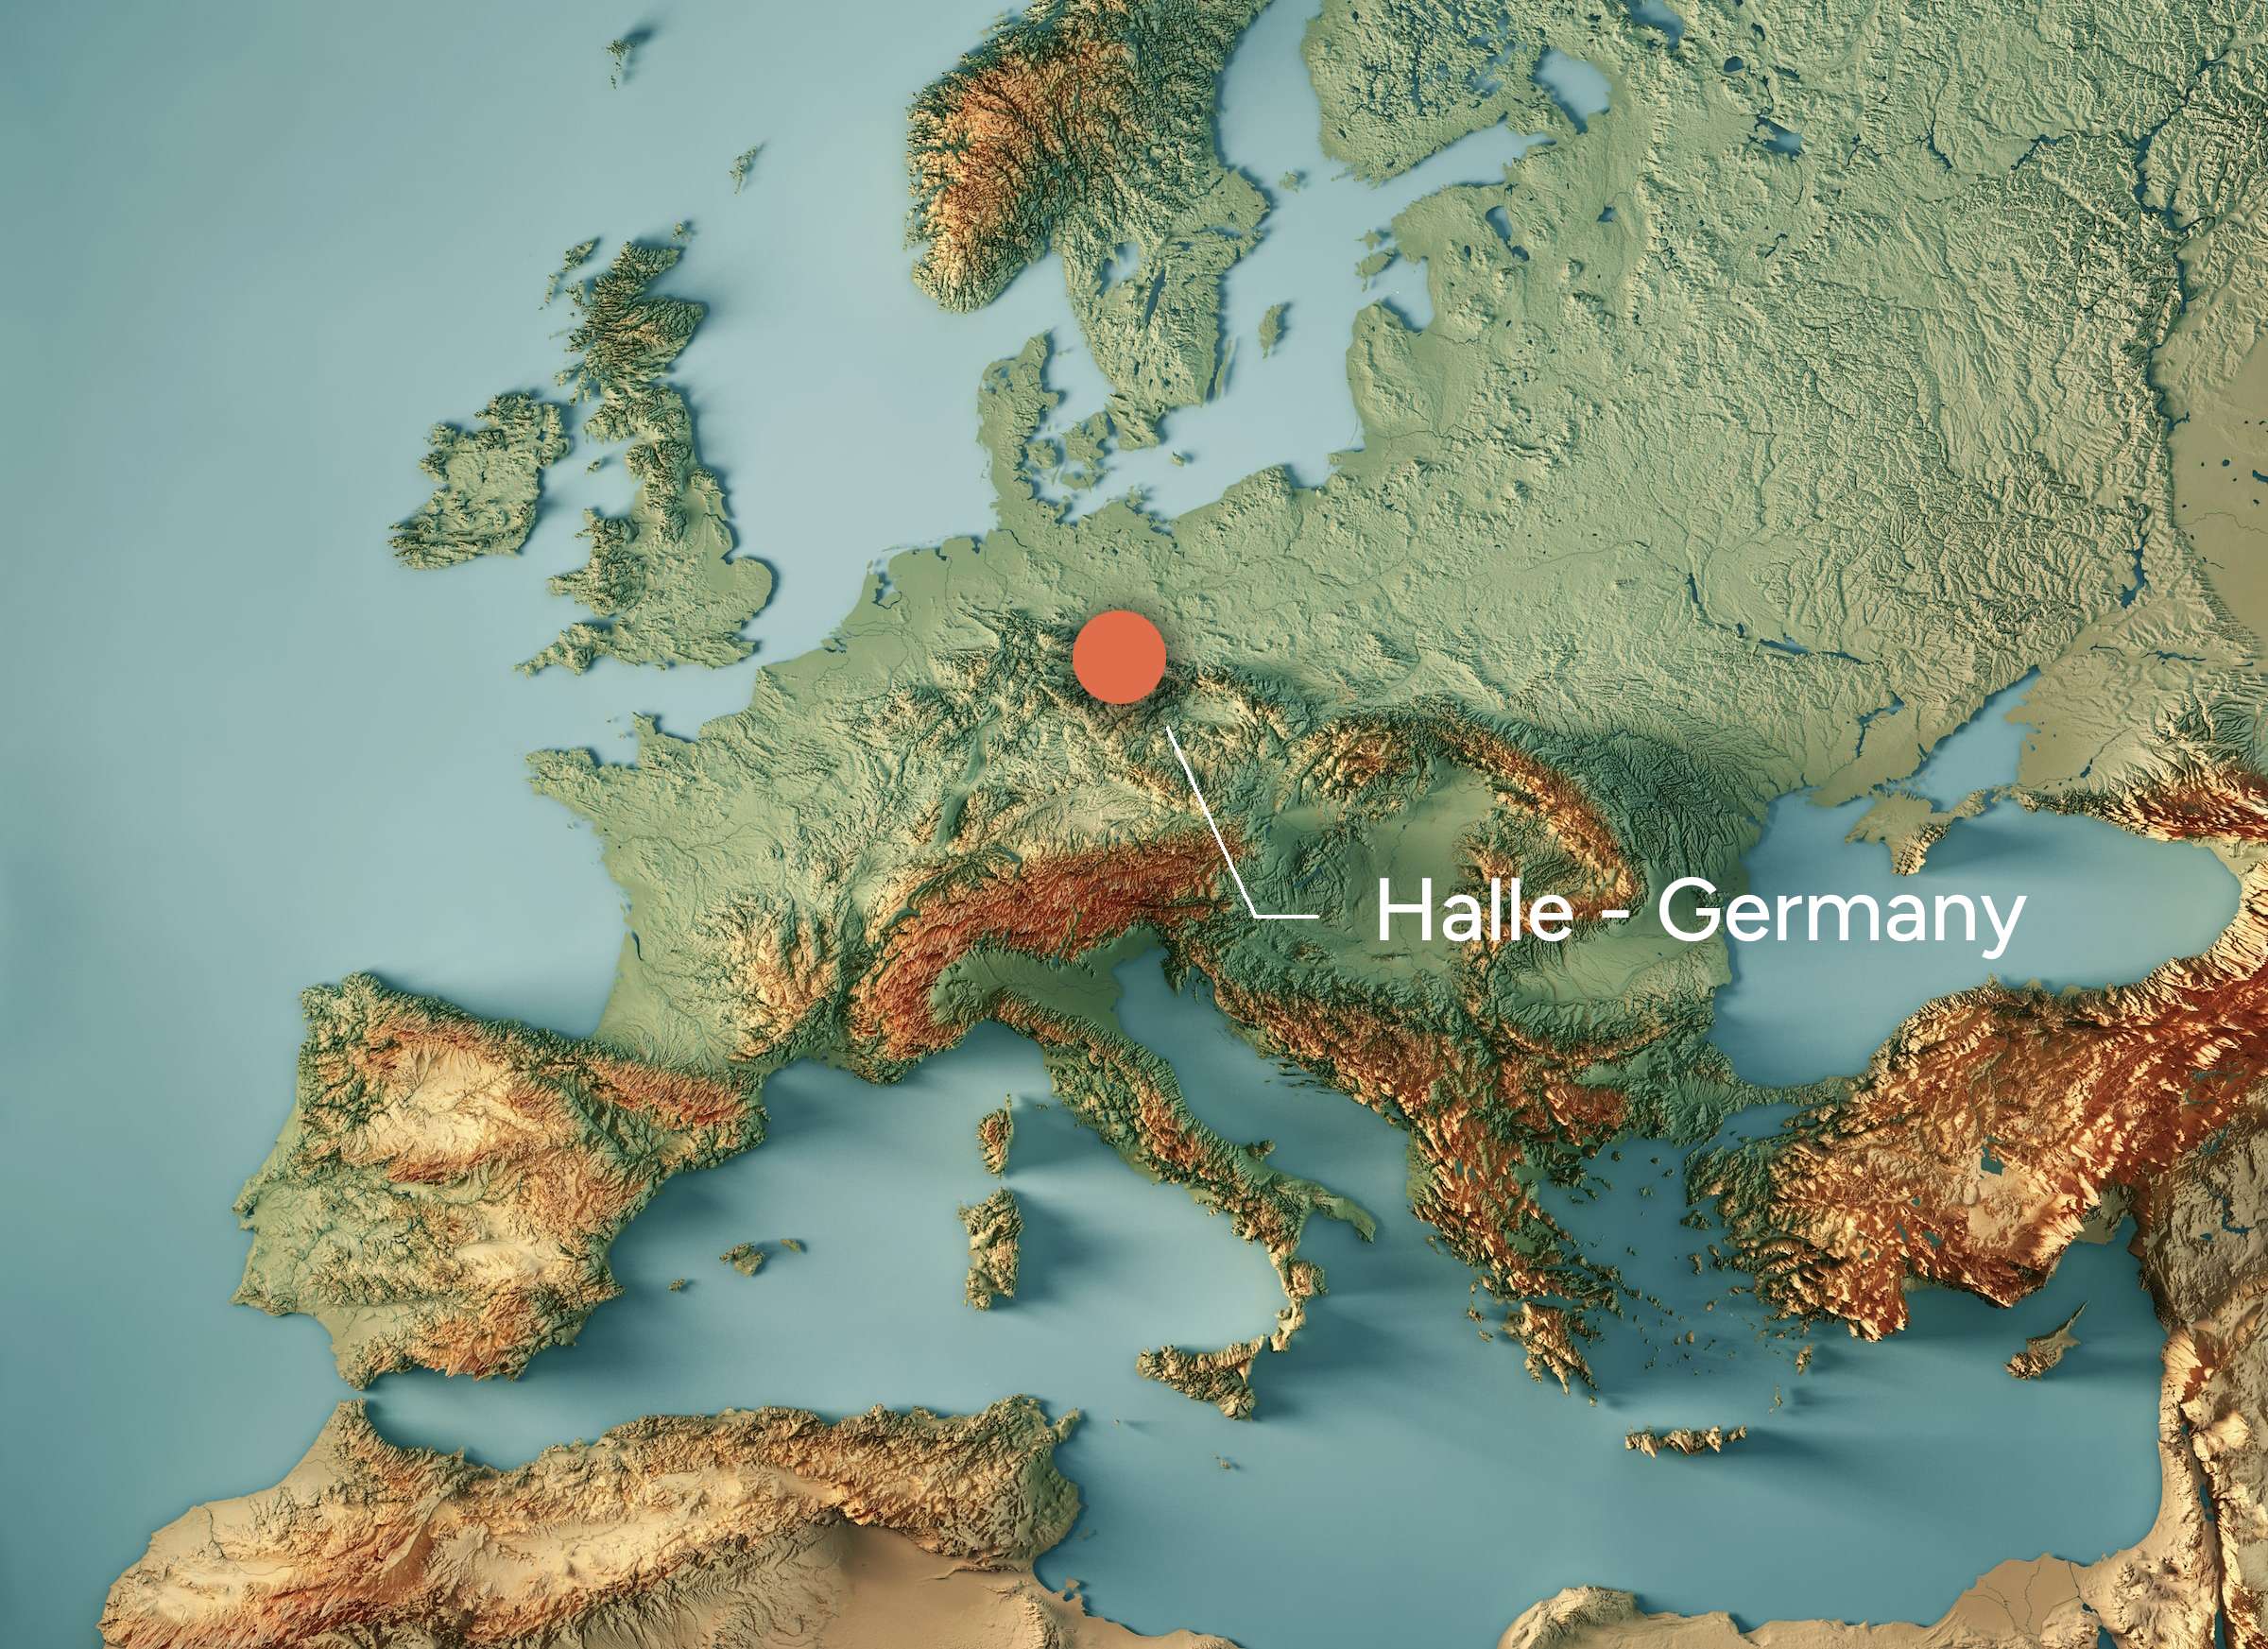 Topography map of Europe highlighting Halle, Germany